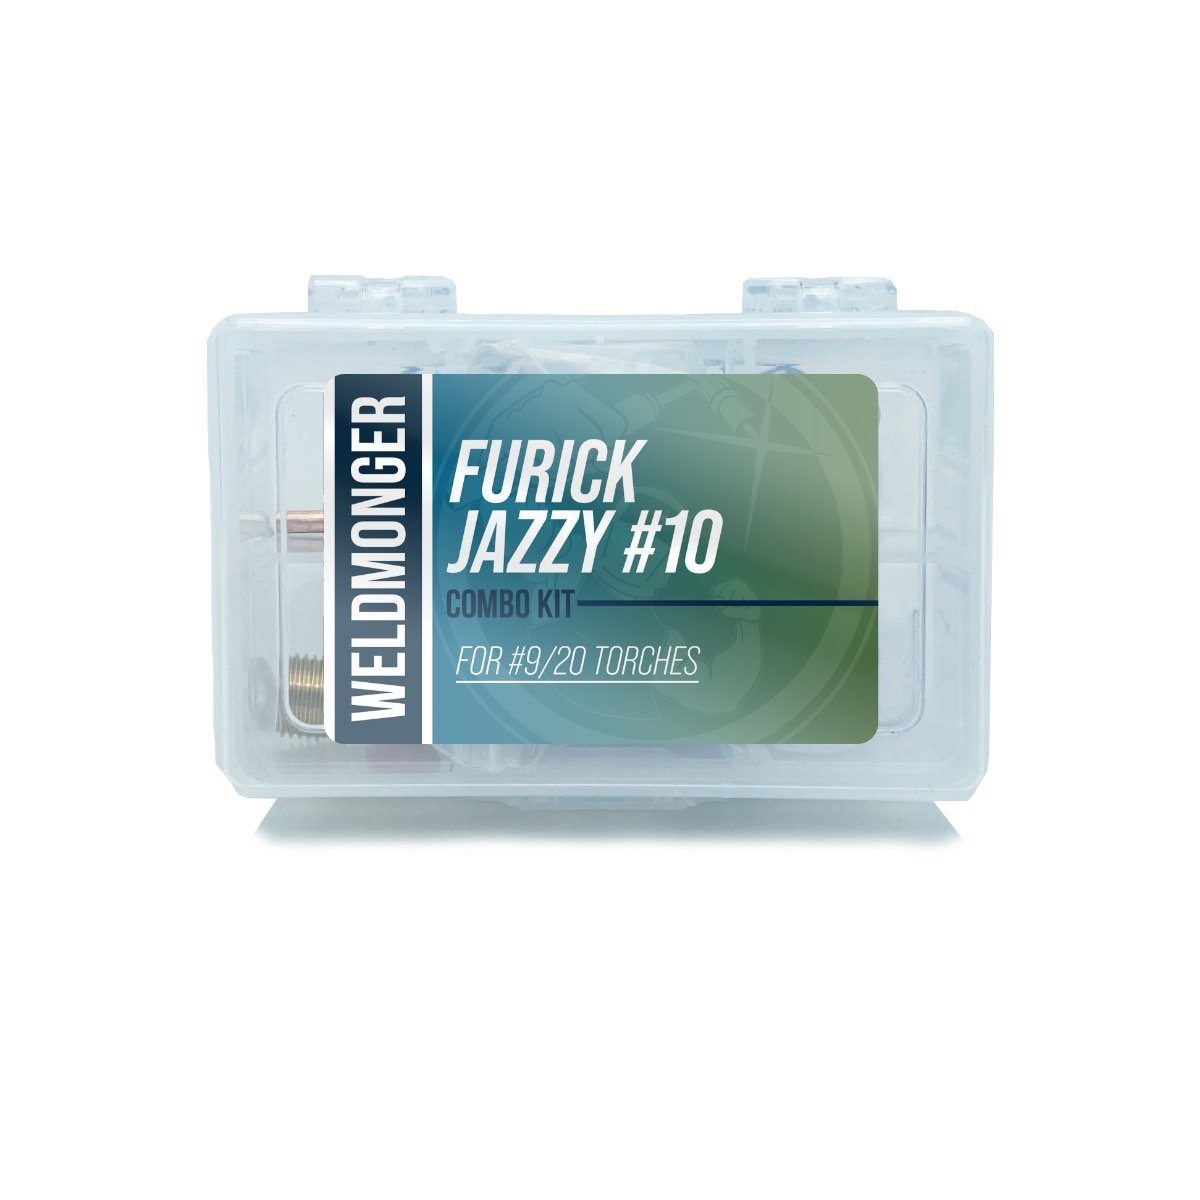 WELDMONGER® Furick Jazzy #10 Combo Kit - For #9 AND #20 Style Torches